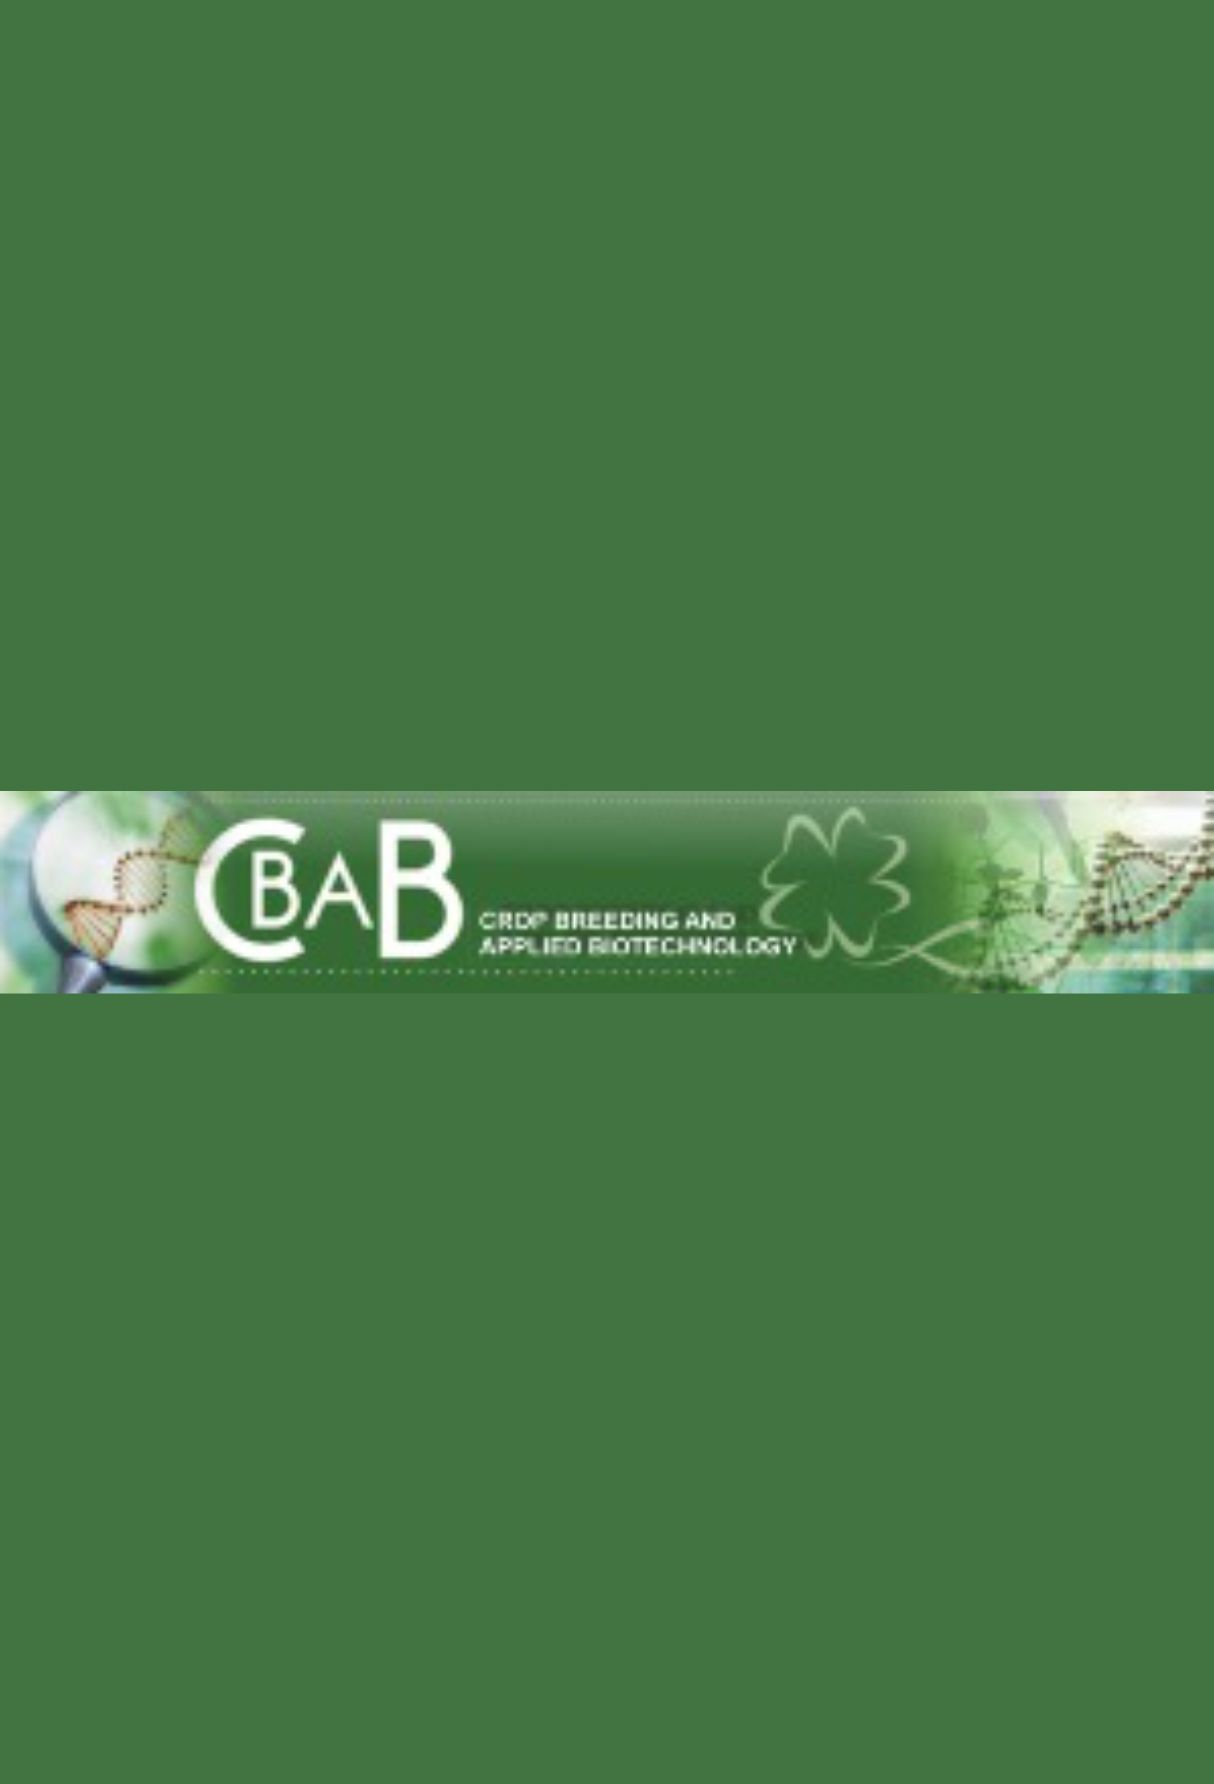 Capa: Crop Breeding and Applied Biotechnology